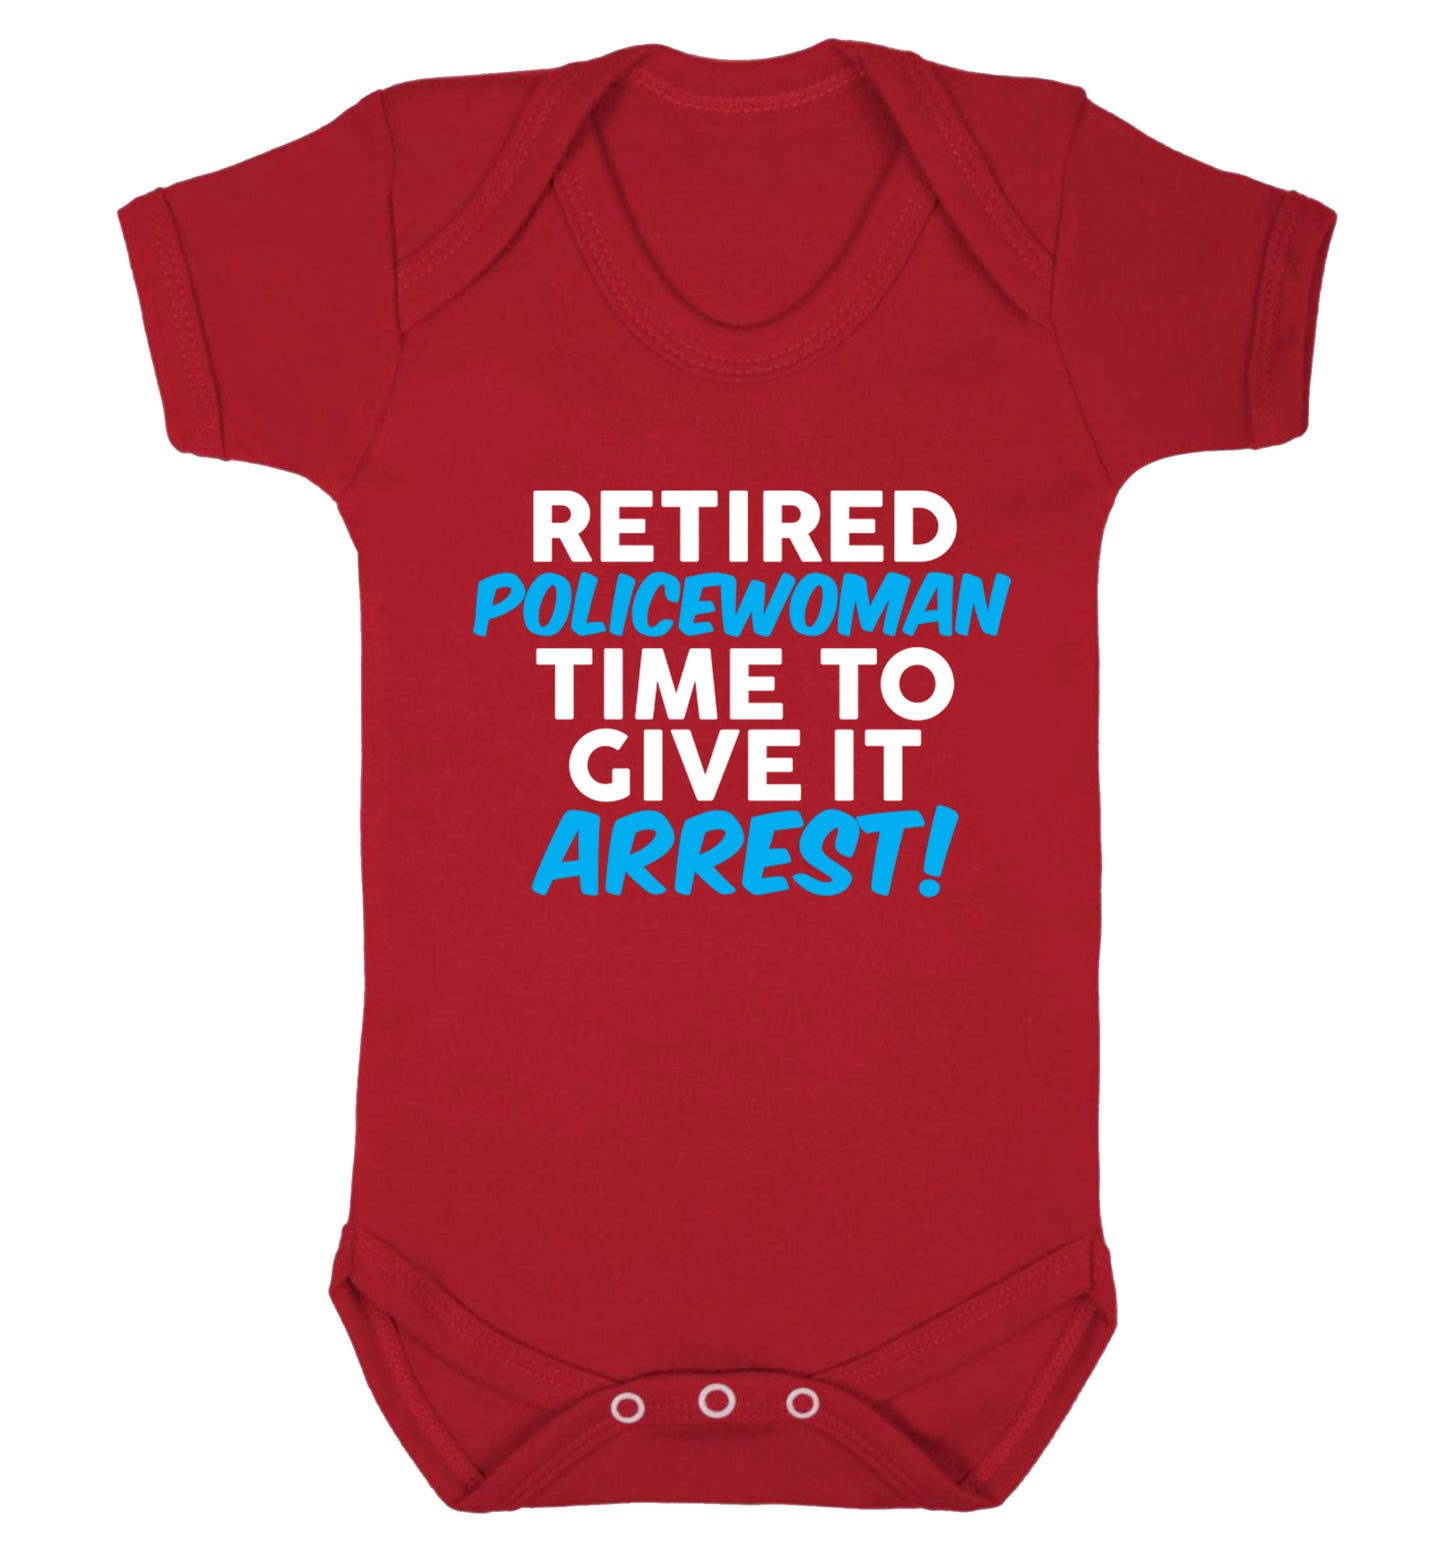 Retired policewoman time to give it arrest Baby Vest red 18-24 months